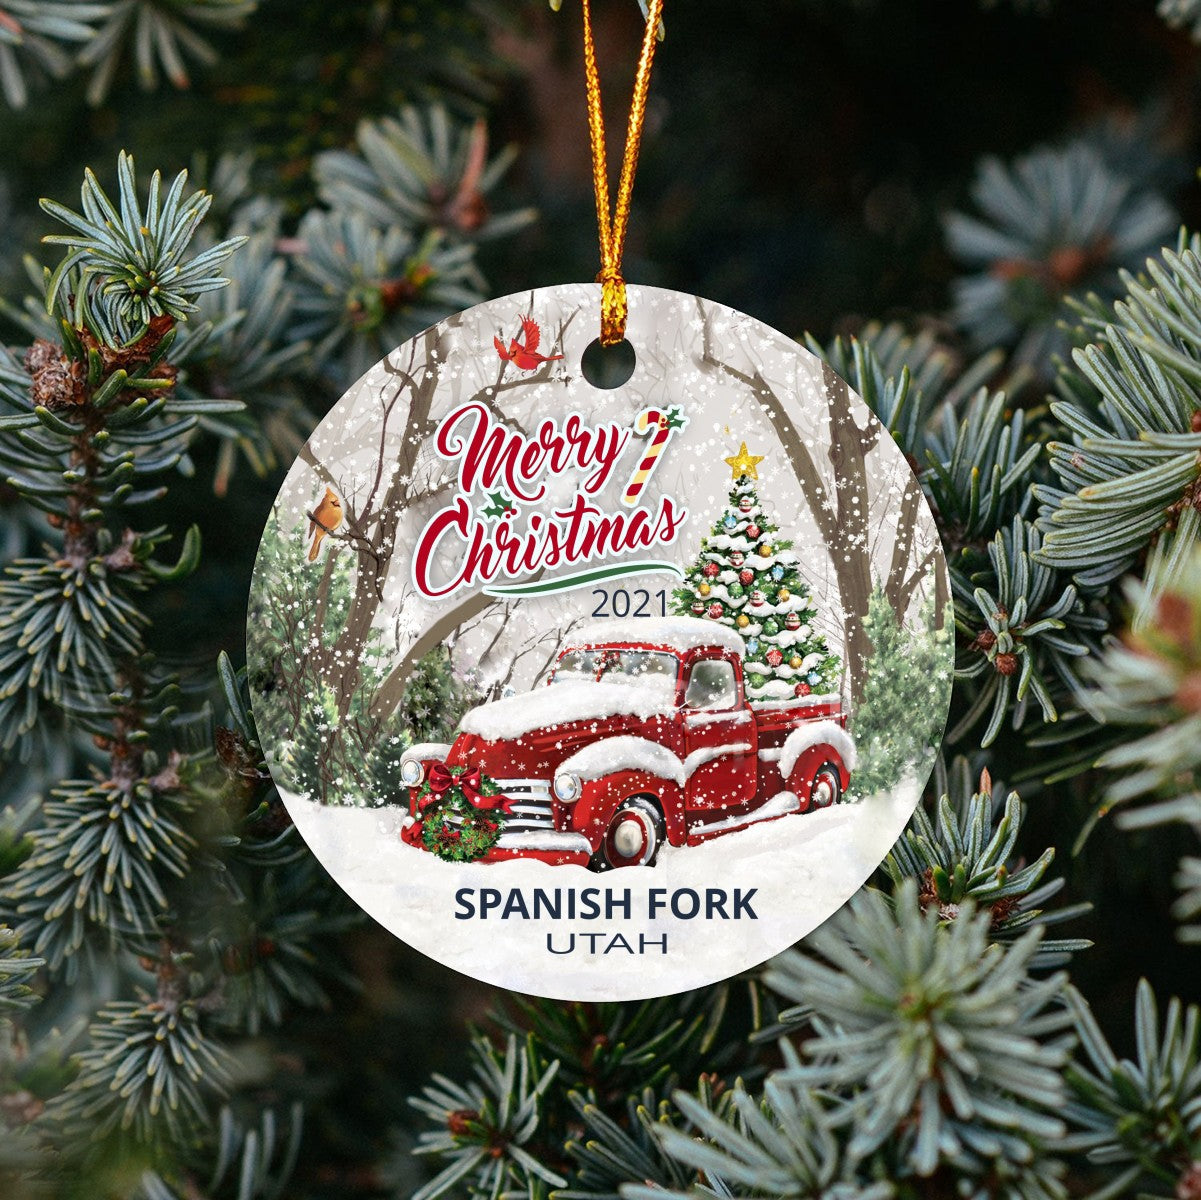 Christmas Tree Ornaments Spanish Fork - Ornament Customize With Name City And State Spanish Fork Utah UT - Red Truck Xmas Ornaments 3'' Plastic Gift For Family, Friend And Housewarming